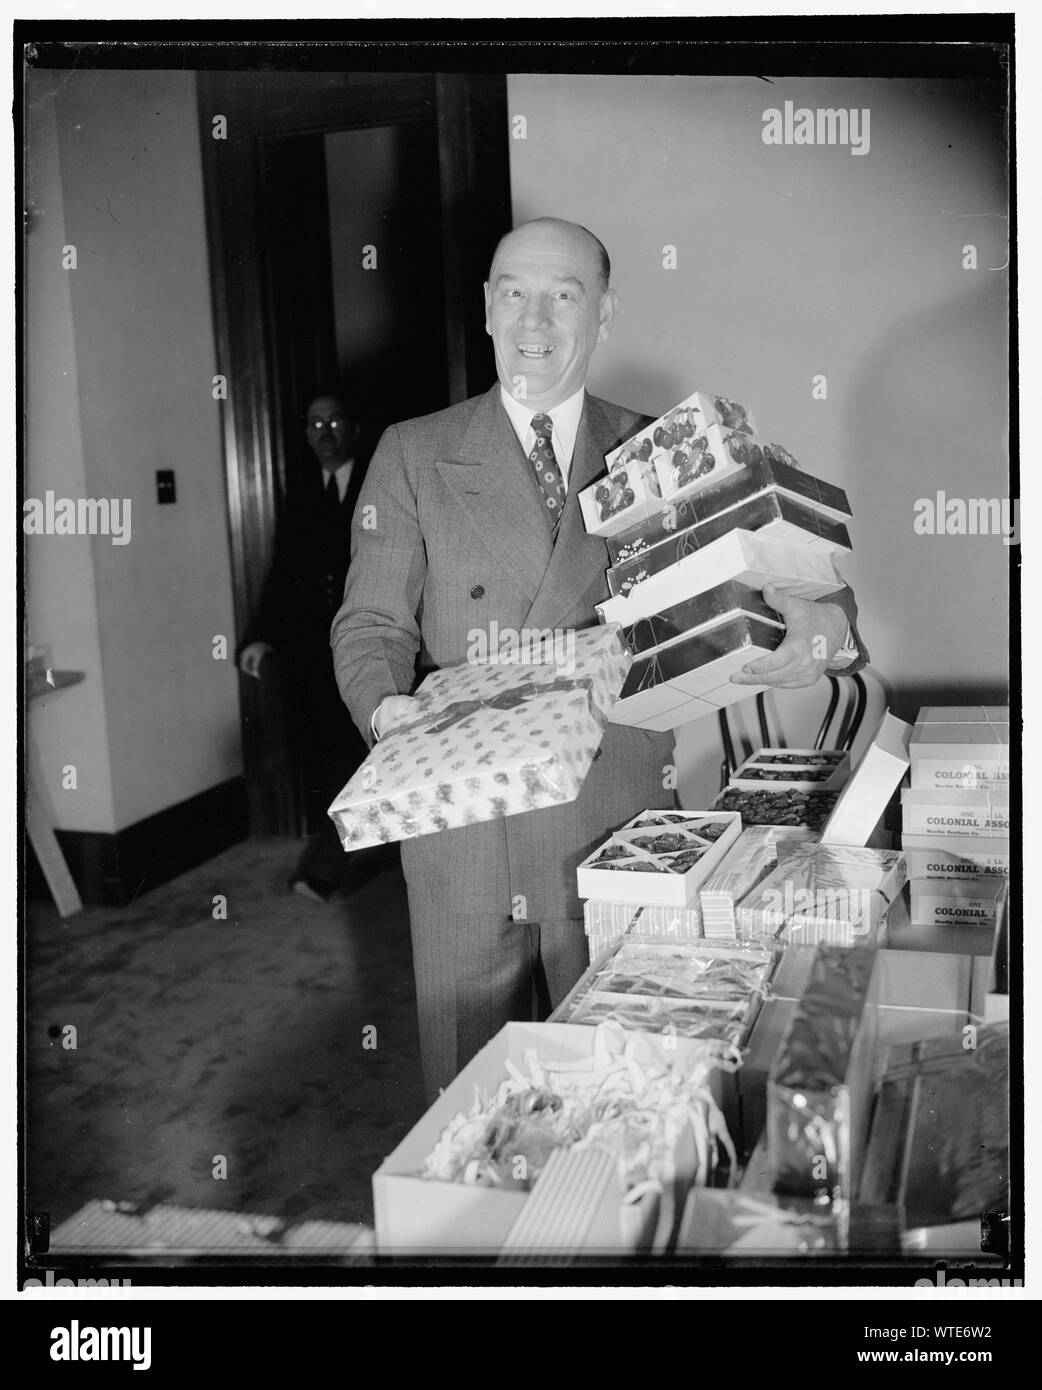 Minnesota Senator does last-minute Xmas shopping. Washington, D.C., Dec. 20. Laden down with packages, Senator Ernest Lundeen, farmer-laborer of Minnesota, reaches his office after taking time from his official duties to do a bit of Christmas shopping Stock Photo